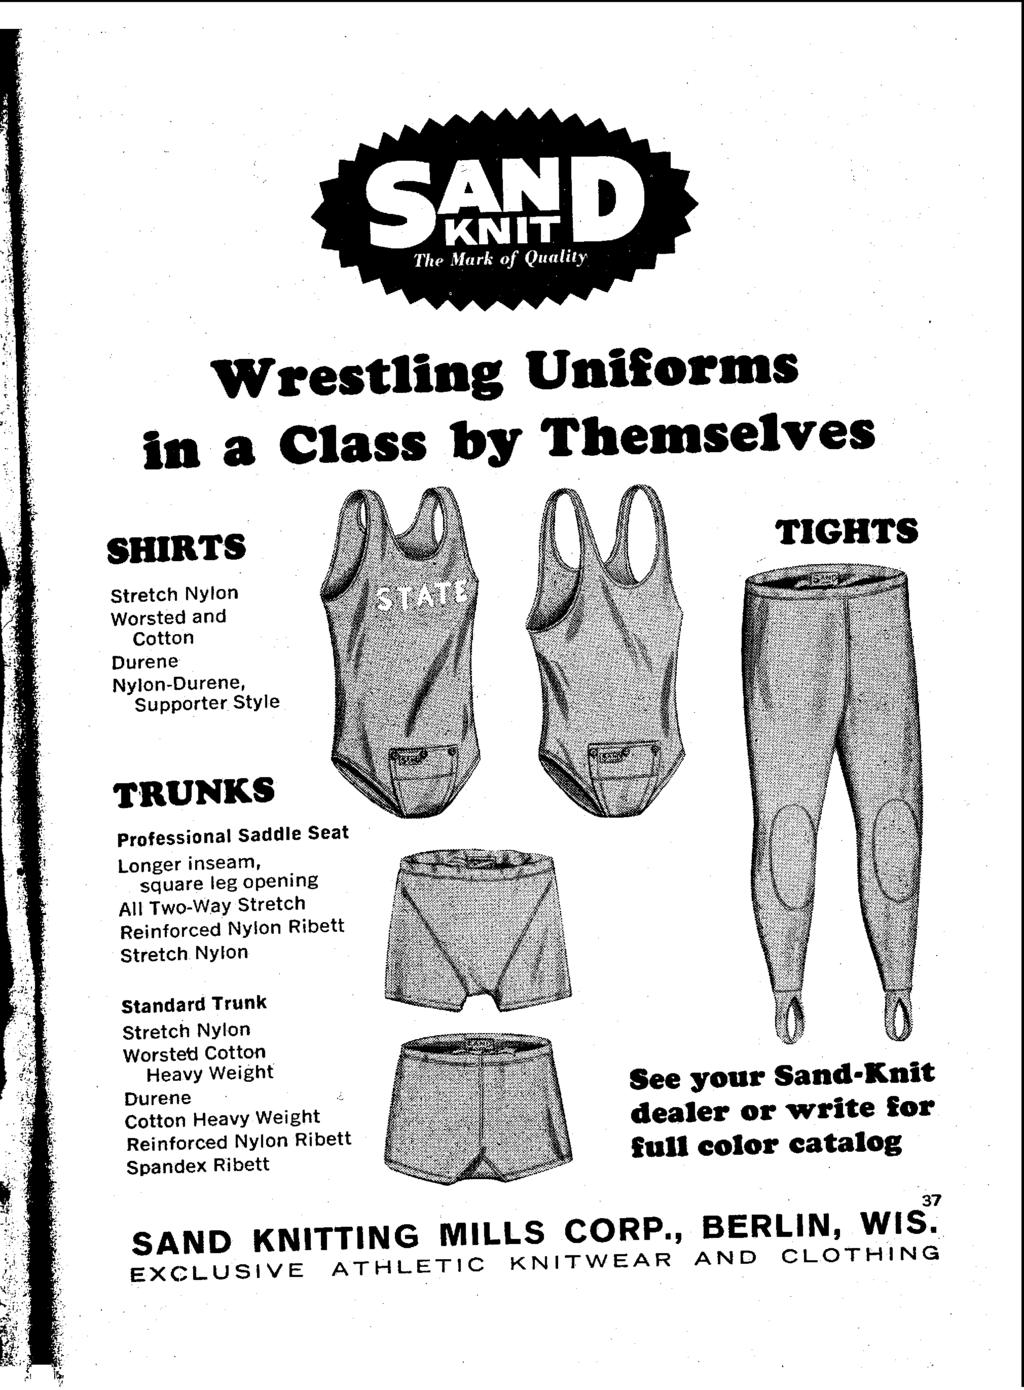 Wrestling Uniforms an a Class by Themselves TIGHTS Worsted and cotton Durene Nylon-Durene, Supporter Style Longer inseam, square leg opening All Two-way Stretch Reinforced Nylon Ribett Stretch Nylon